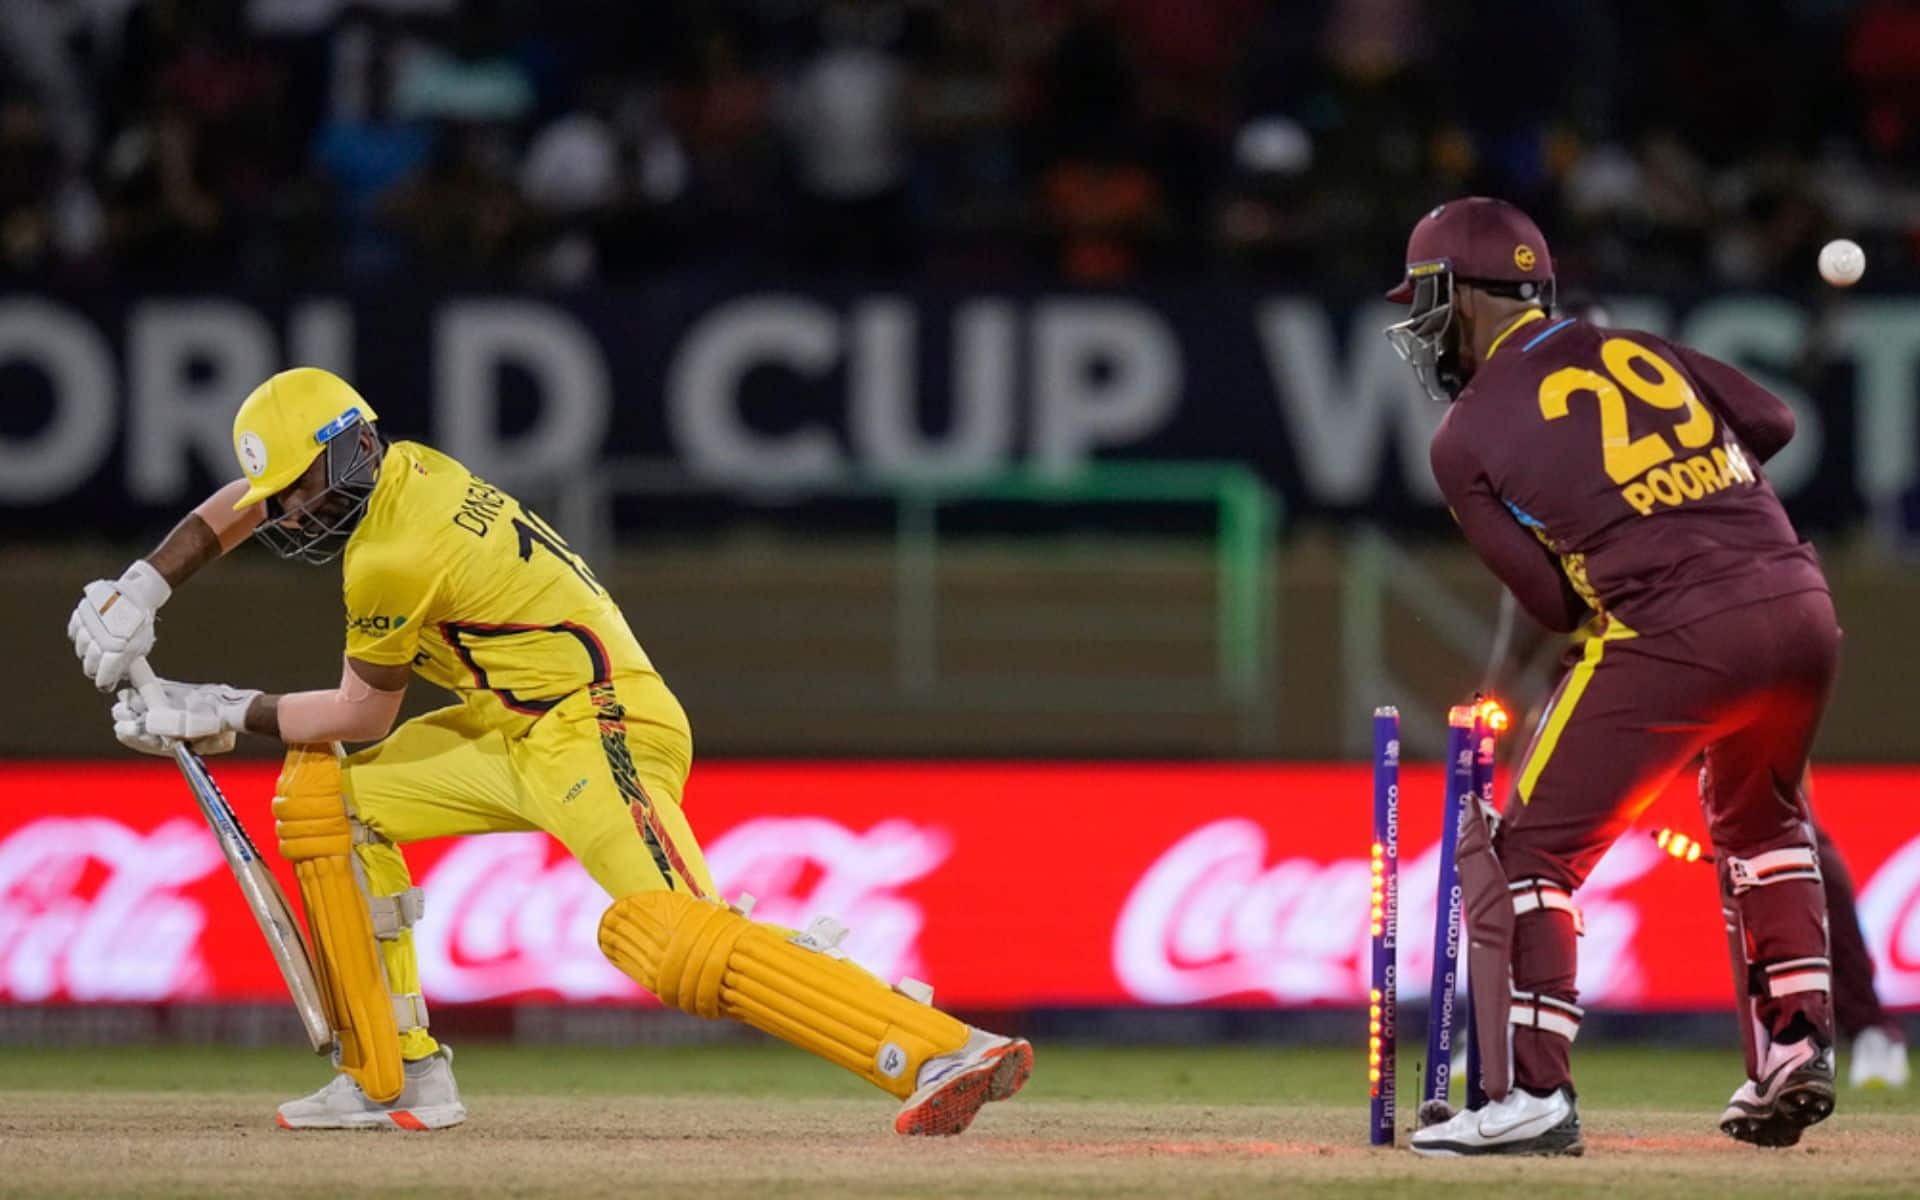 Uganda Fall Like A Pack Of Cards; West Indies Shatter Records With Their Brilliant Bowling